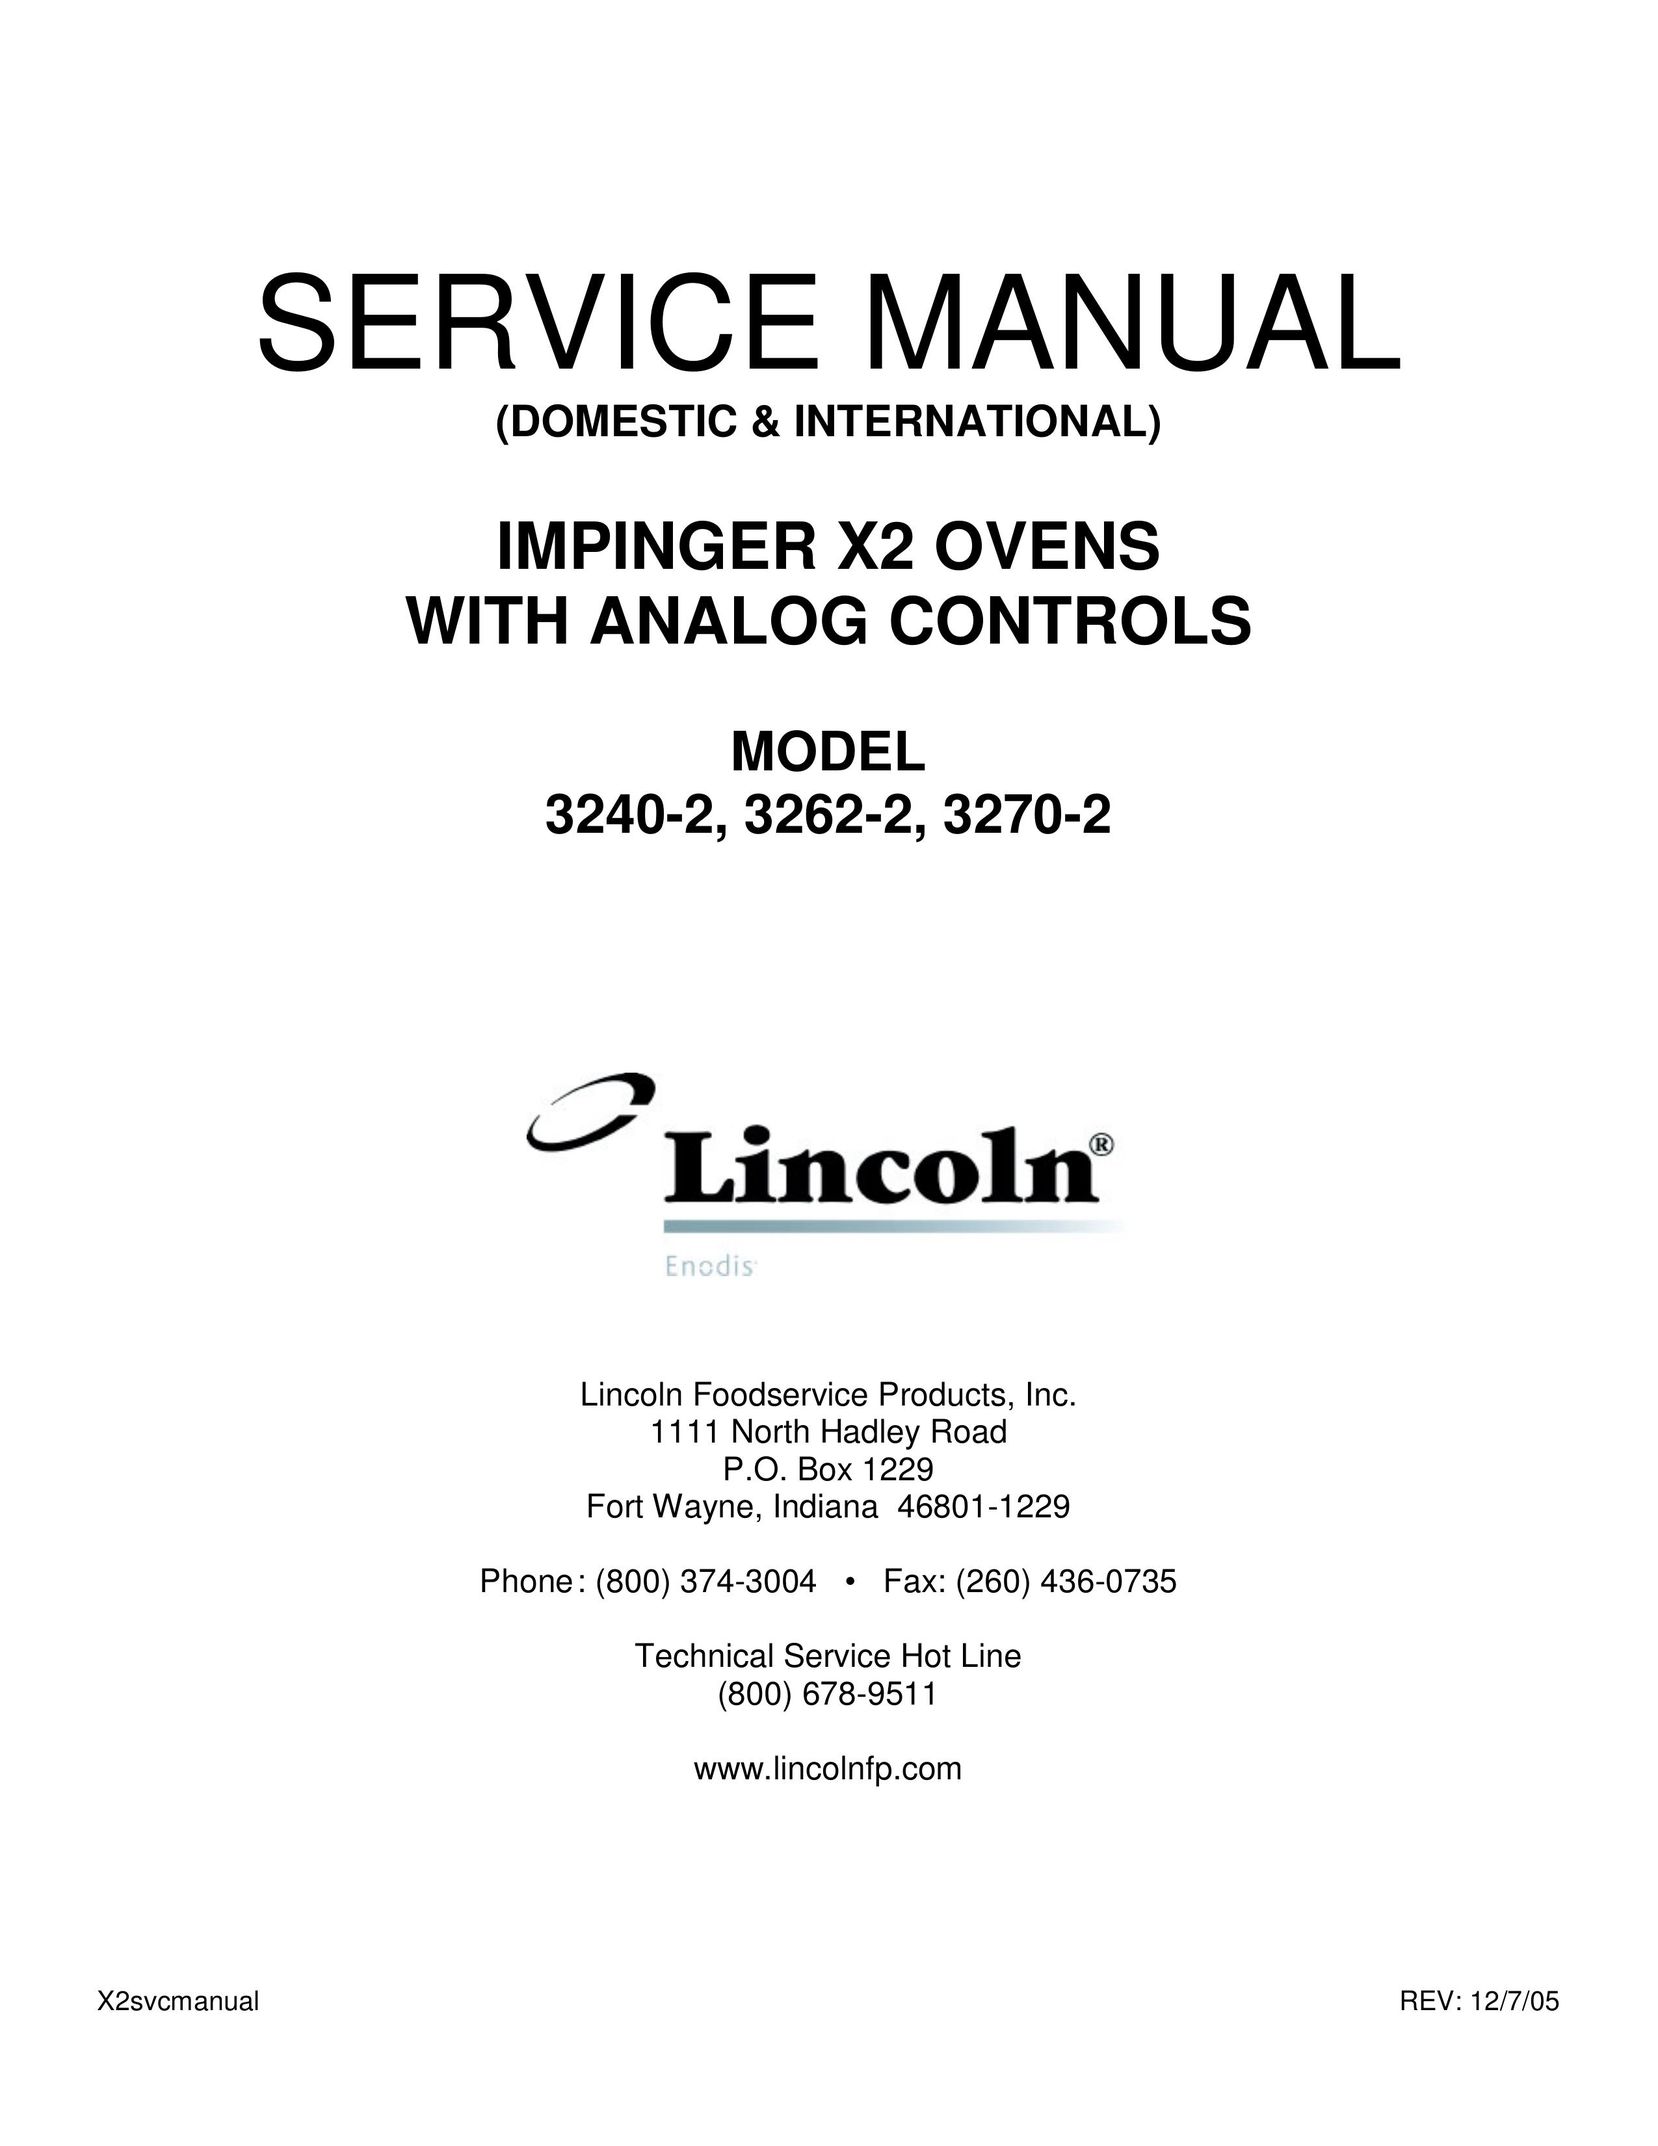 Lincoln 3270-2 Double Oven User Manual